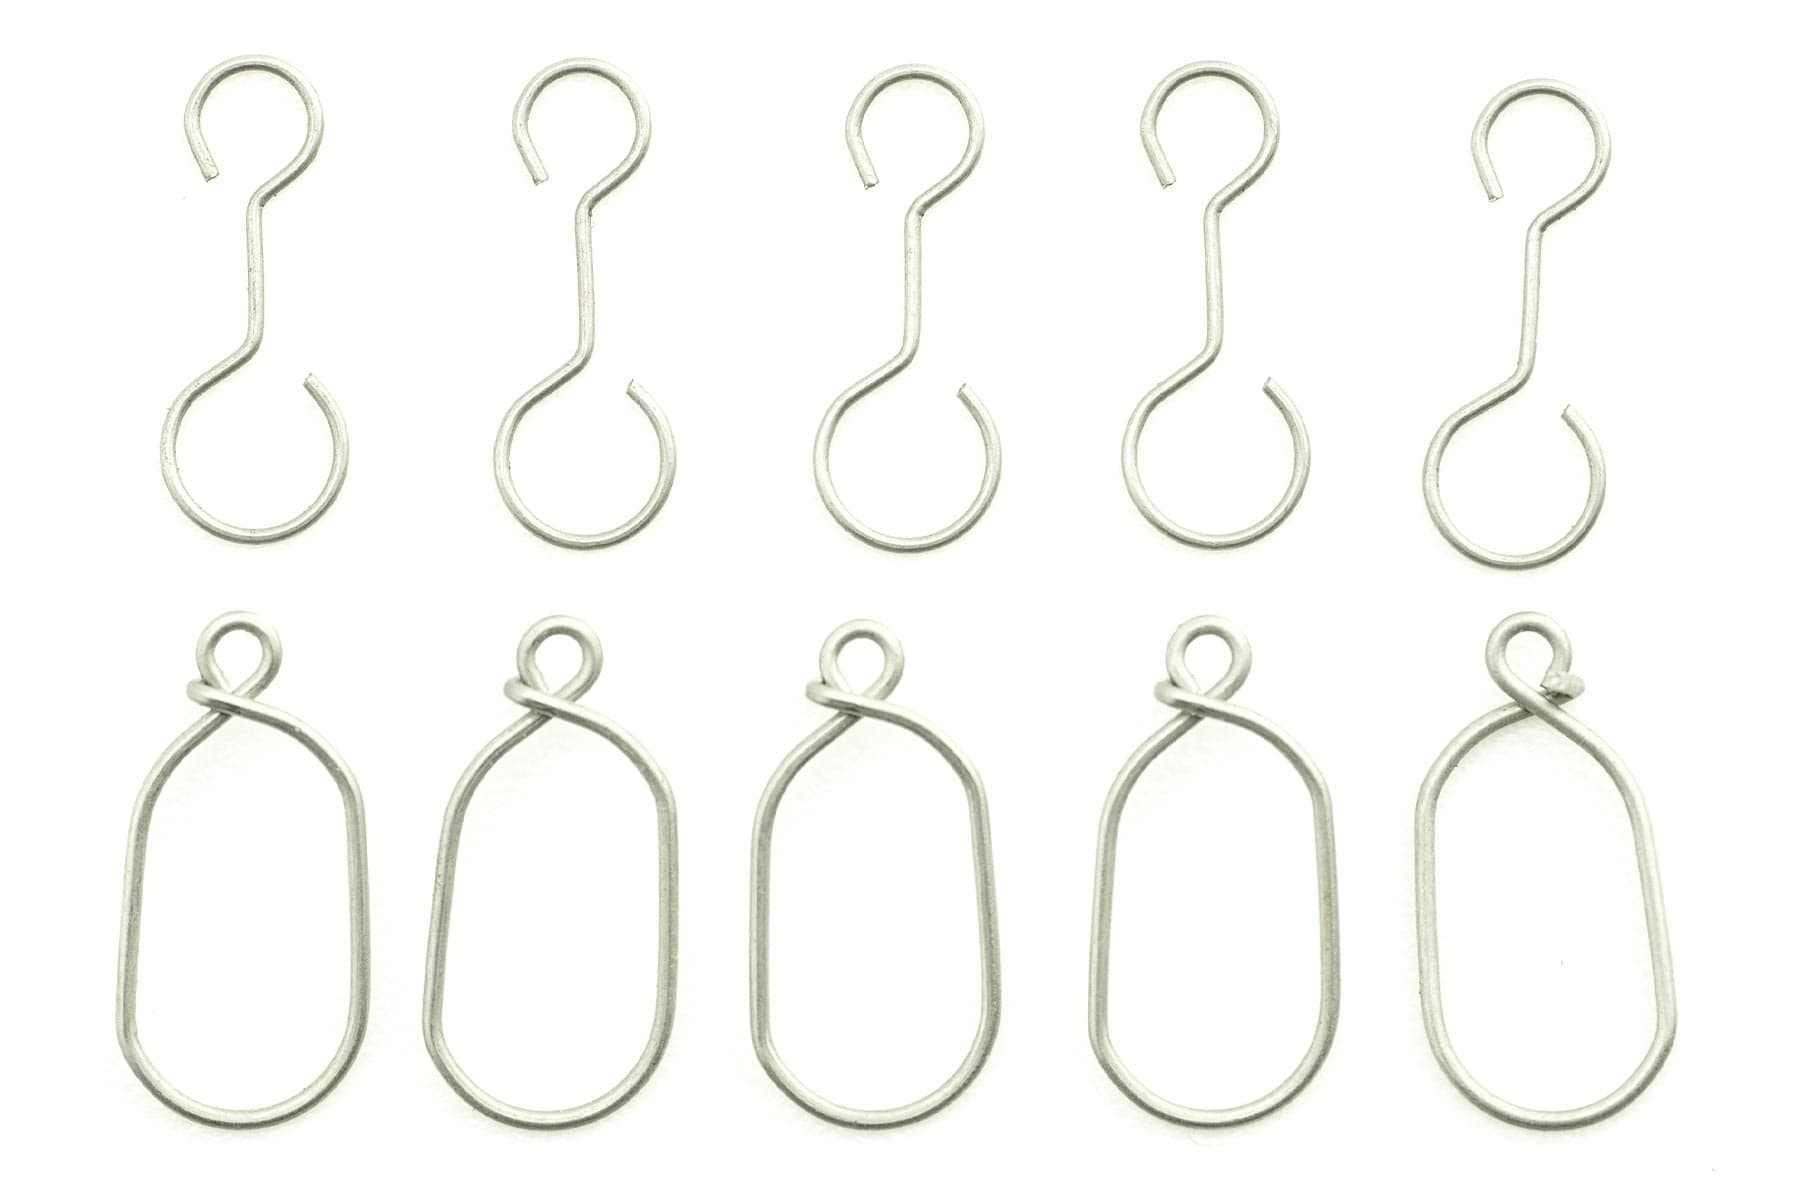 Bancroft 400mm Binary Mainsail Luff Rings and Sails Attachment Hook (5 Pack) BNC1043-105